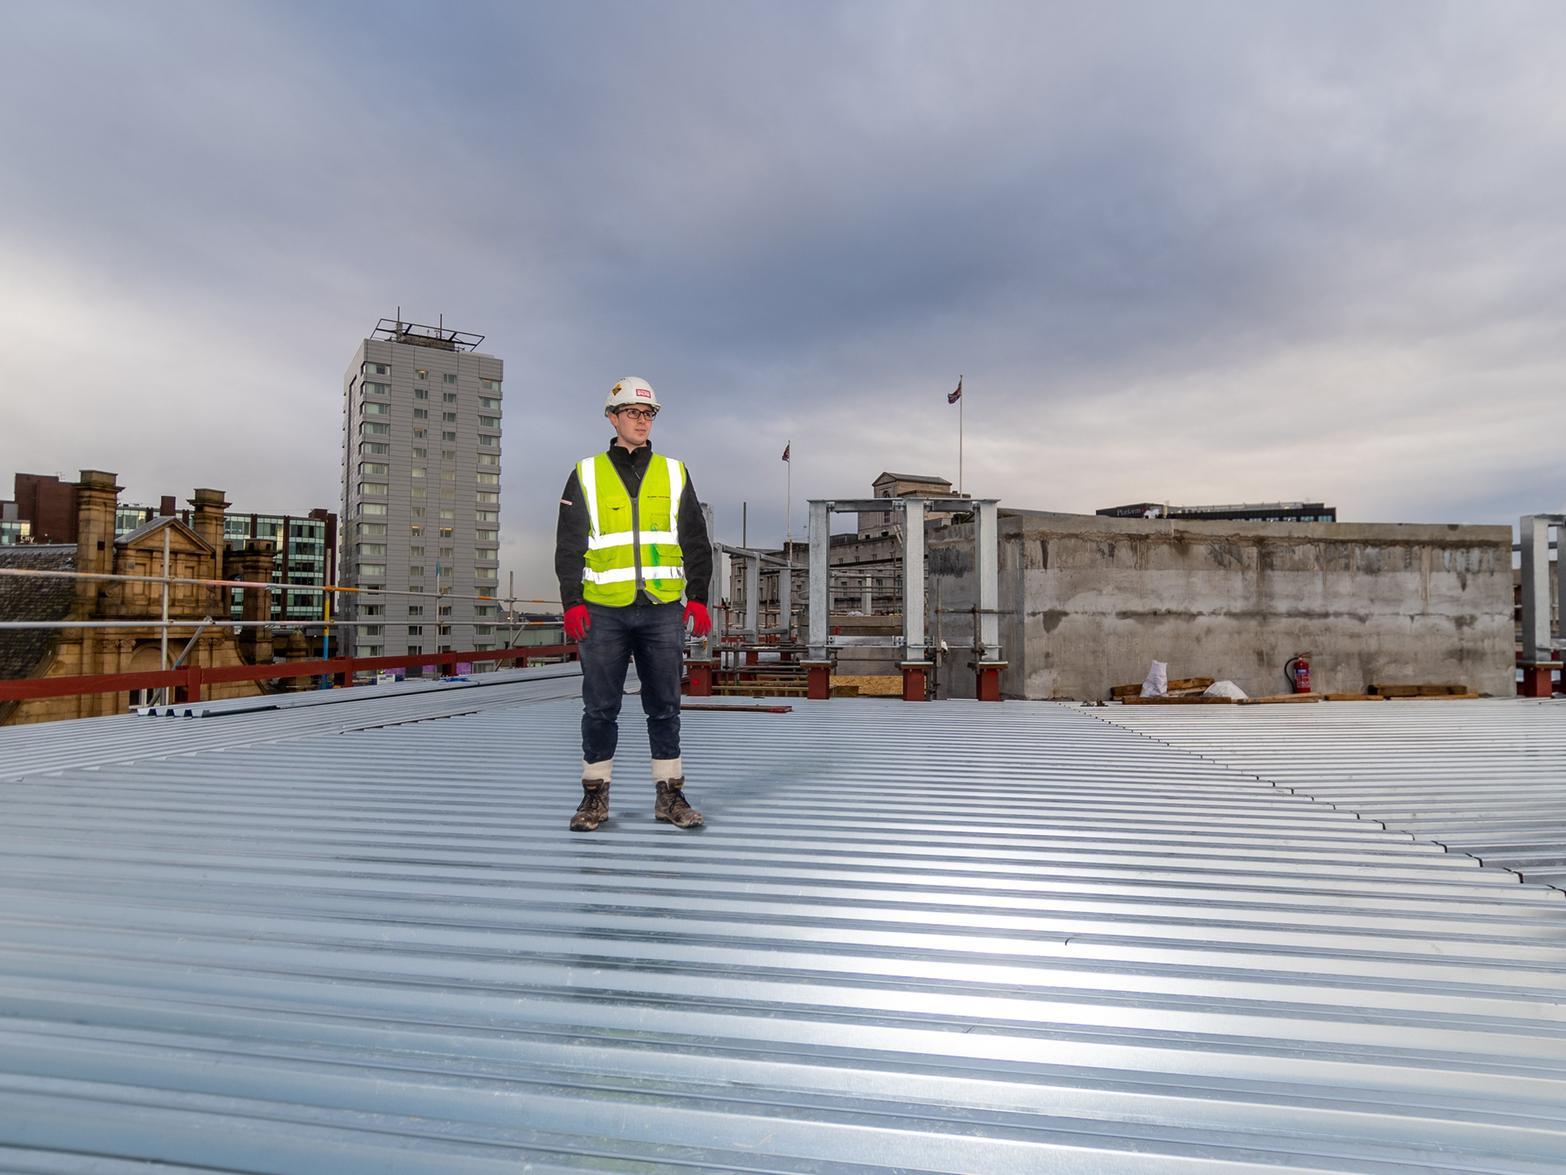 Pictured Eddy Bryan, Graduate engineer for Sir Robert McAlpine looking at the construction progress to date.